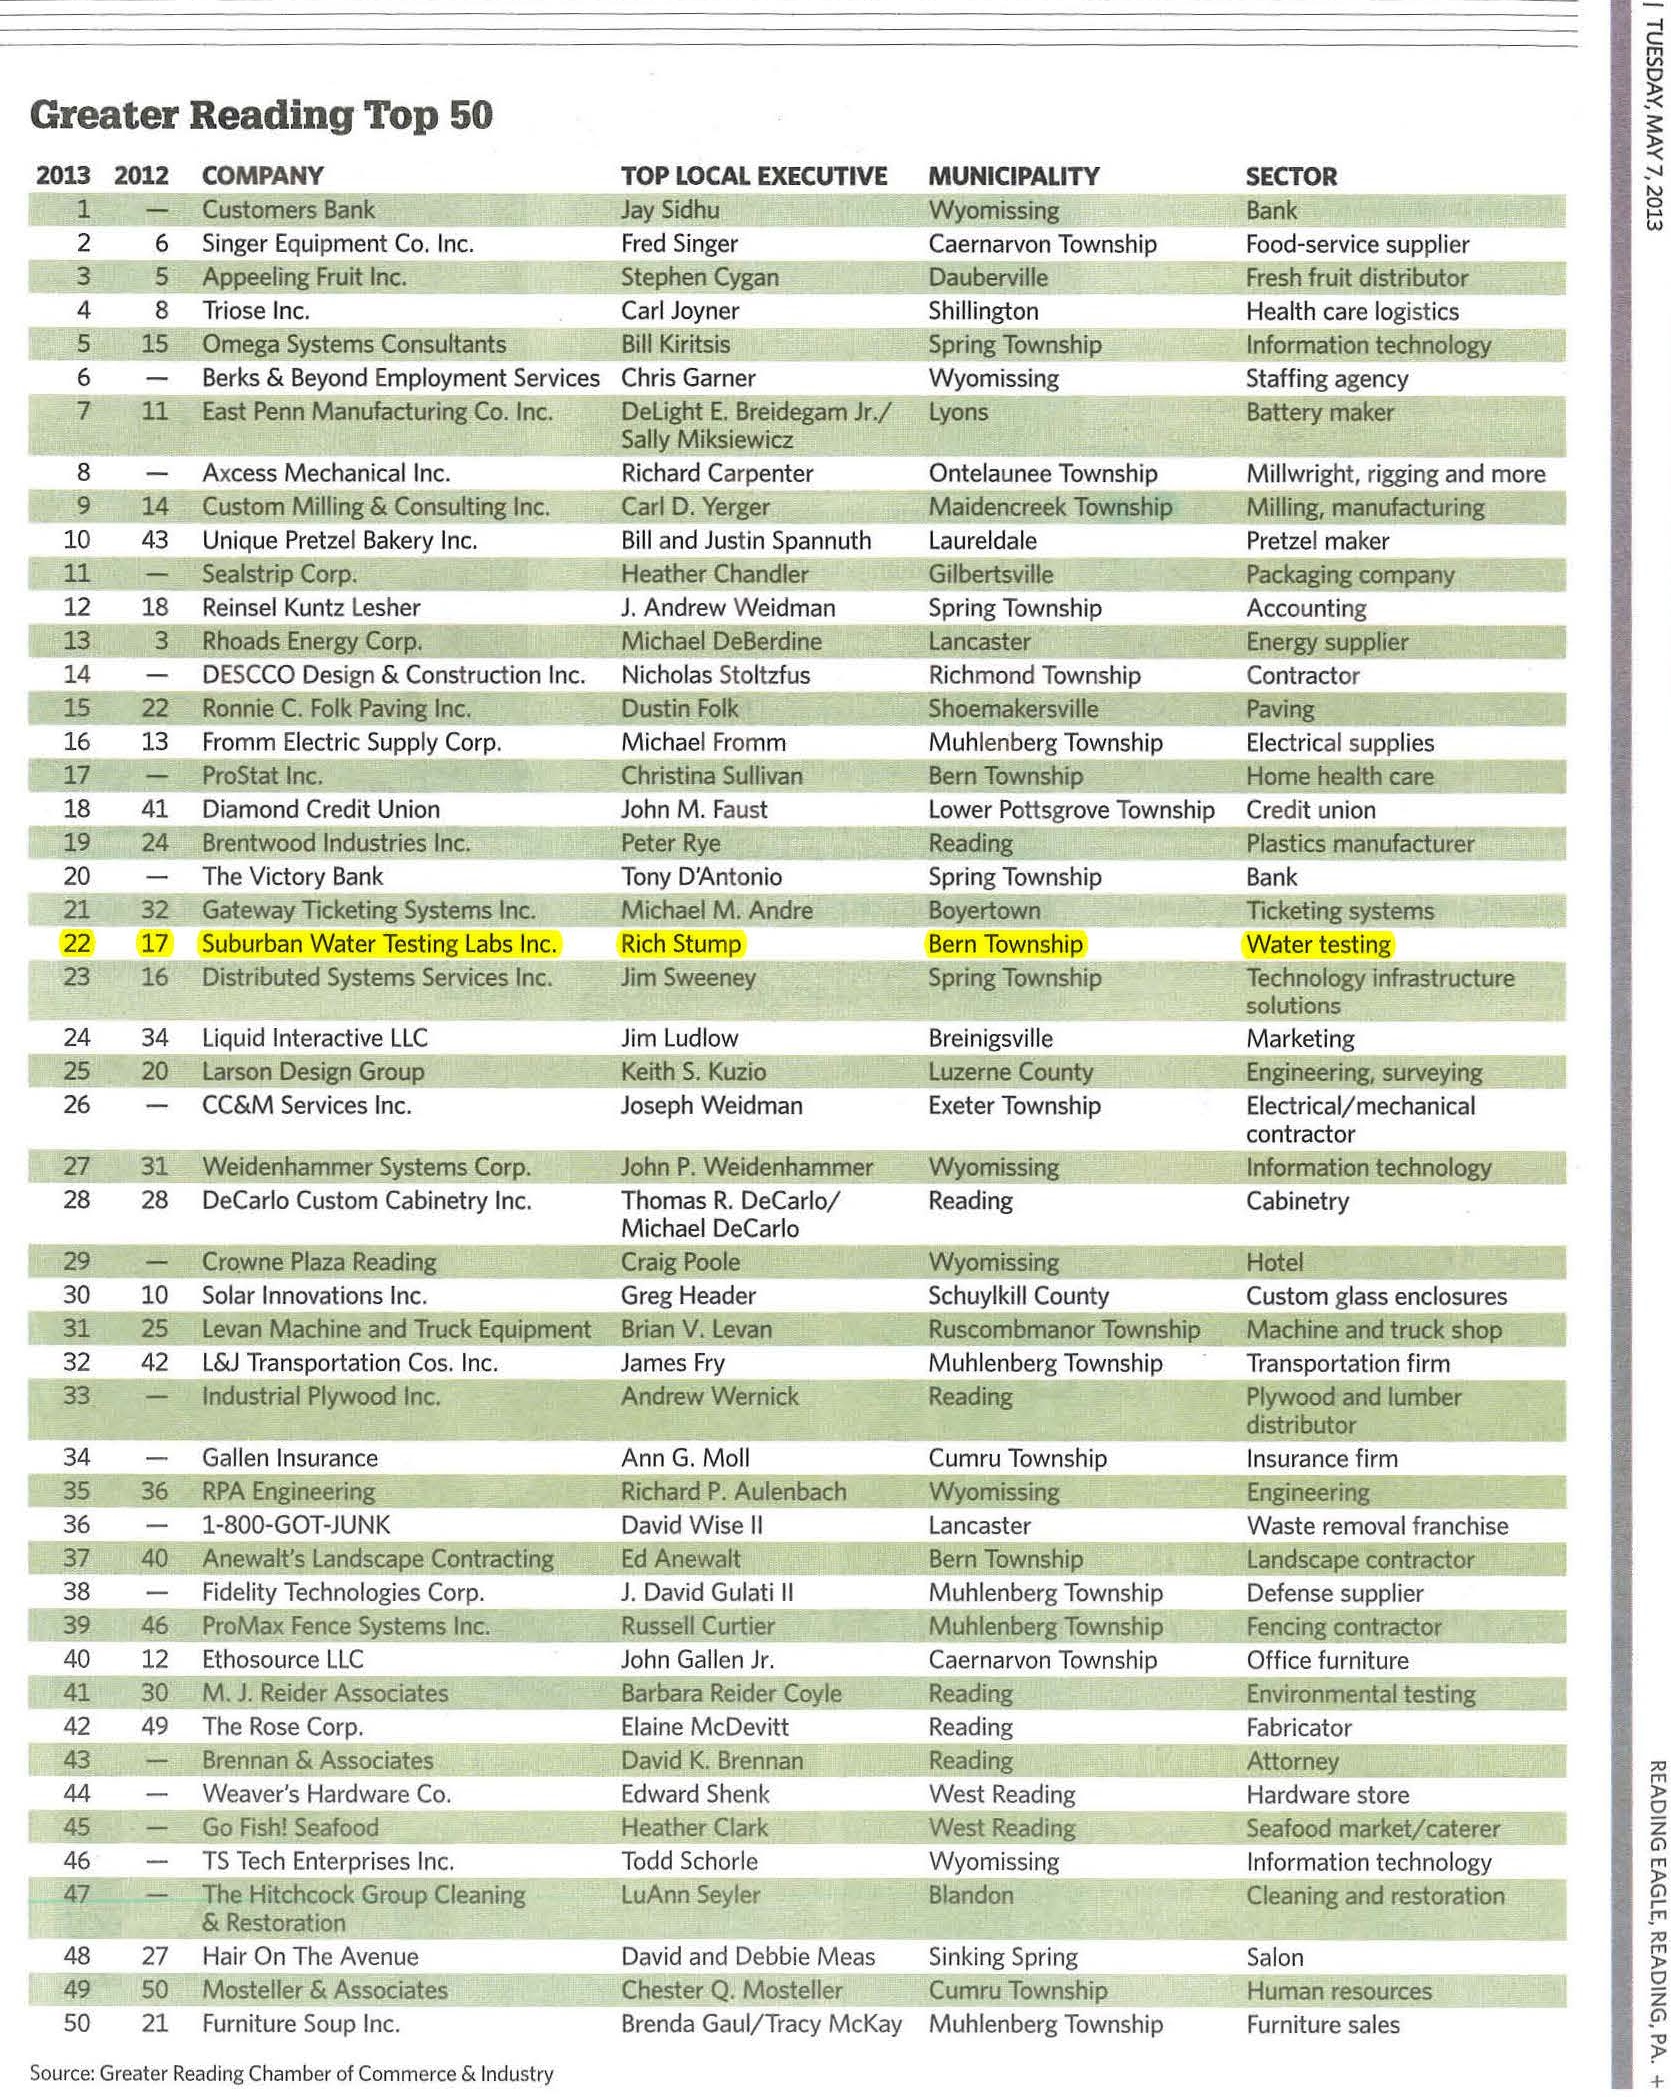 Greater Reading Top 50 2013